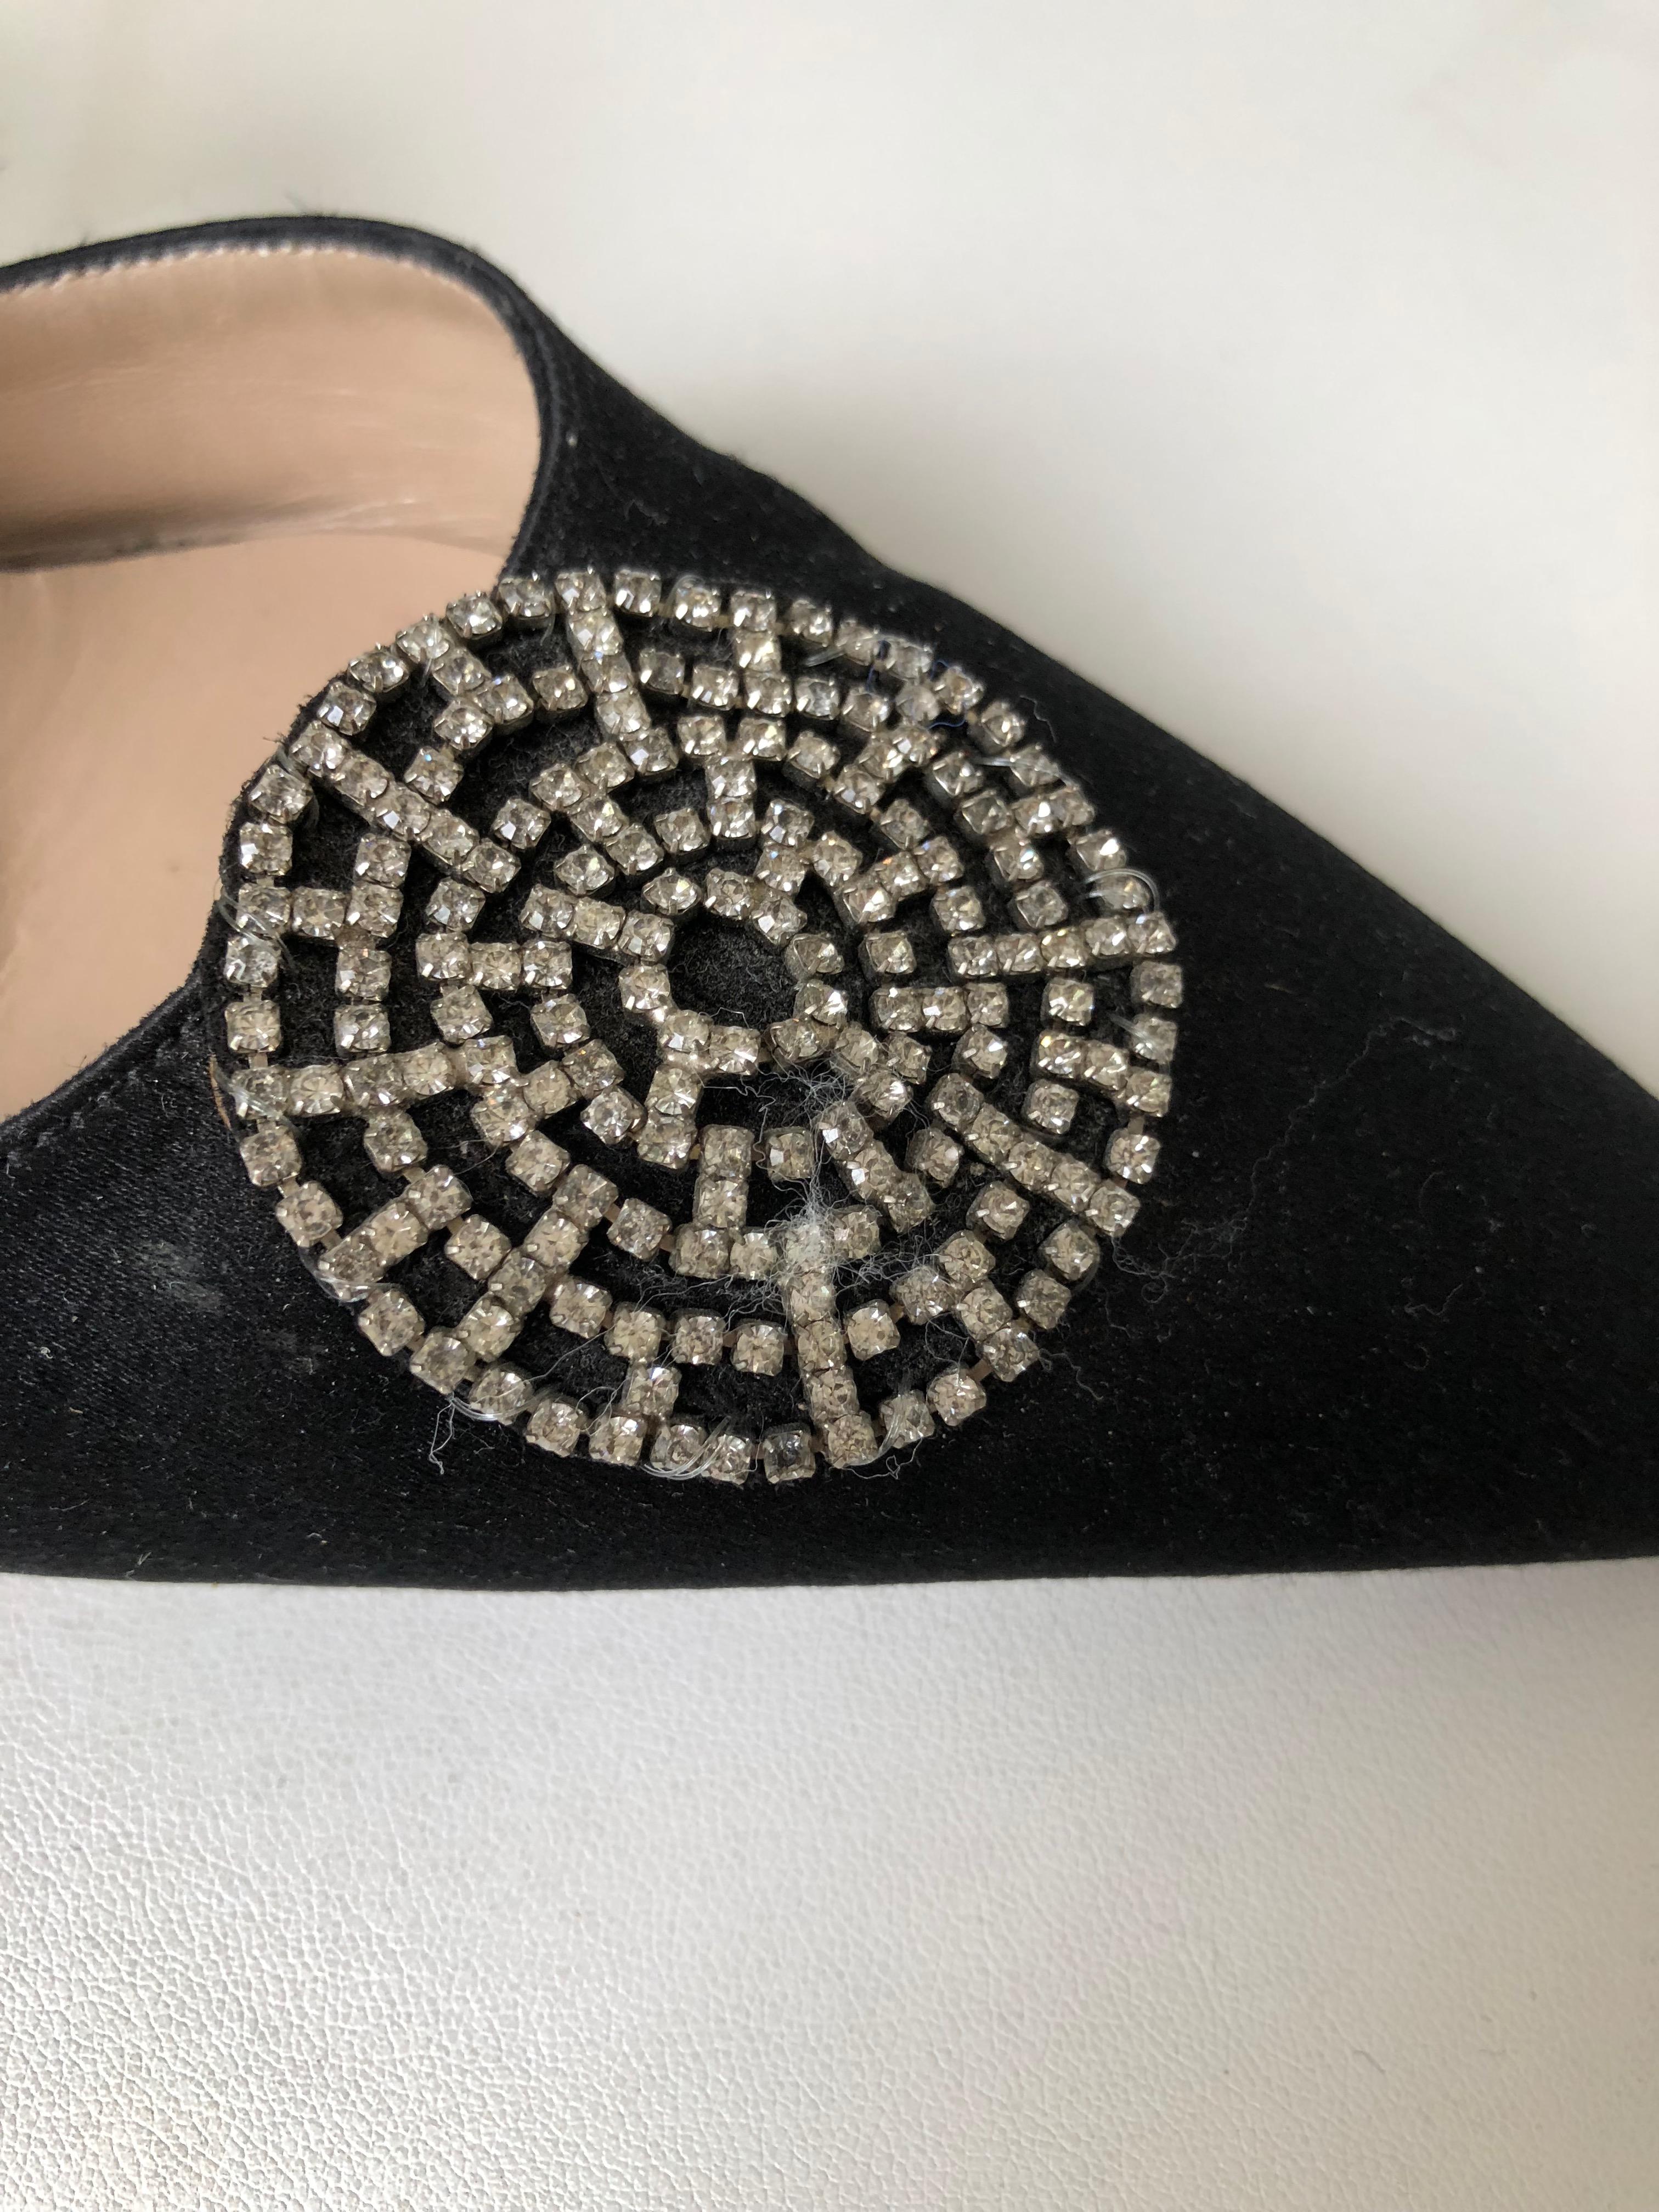 Embellished Manolo Blahnik mules, pointed toes.
Princess shoes.